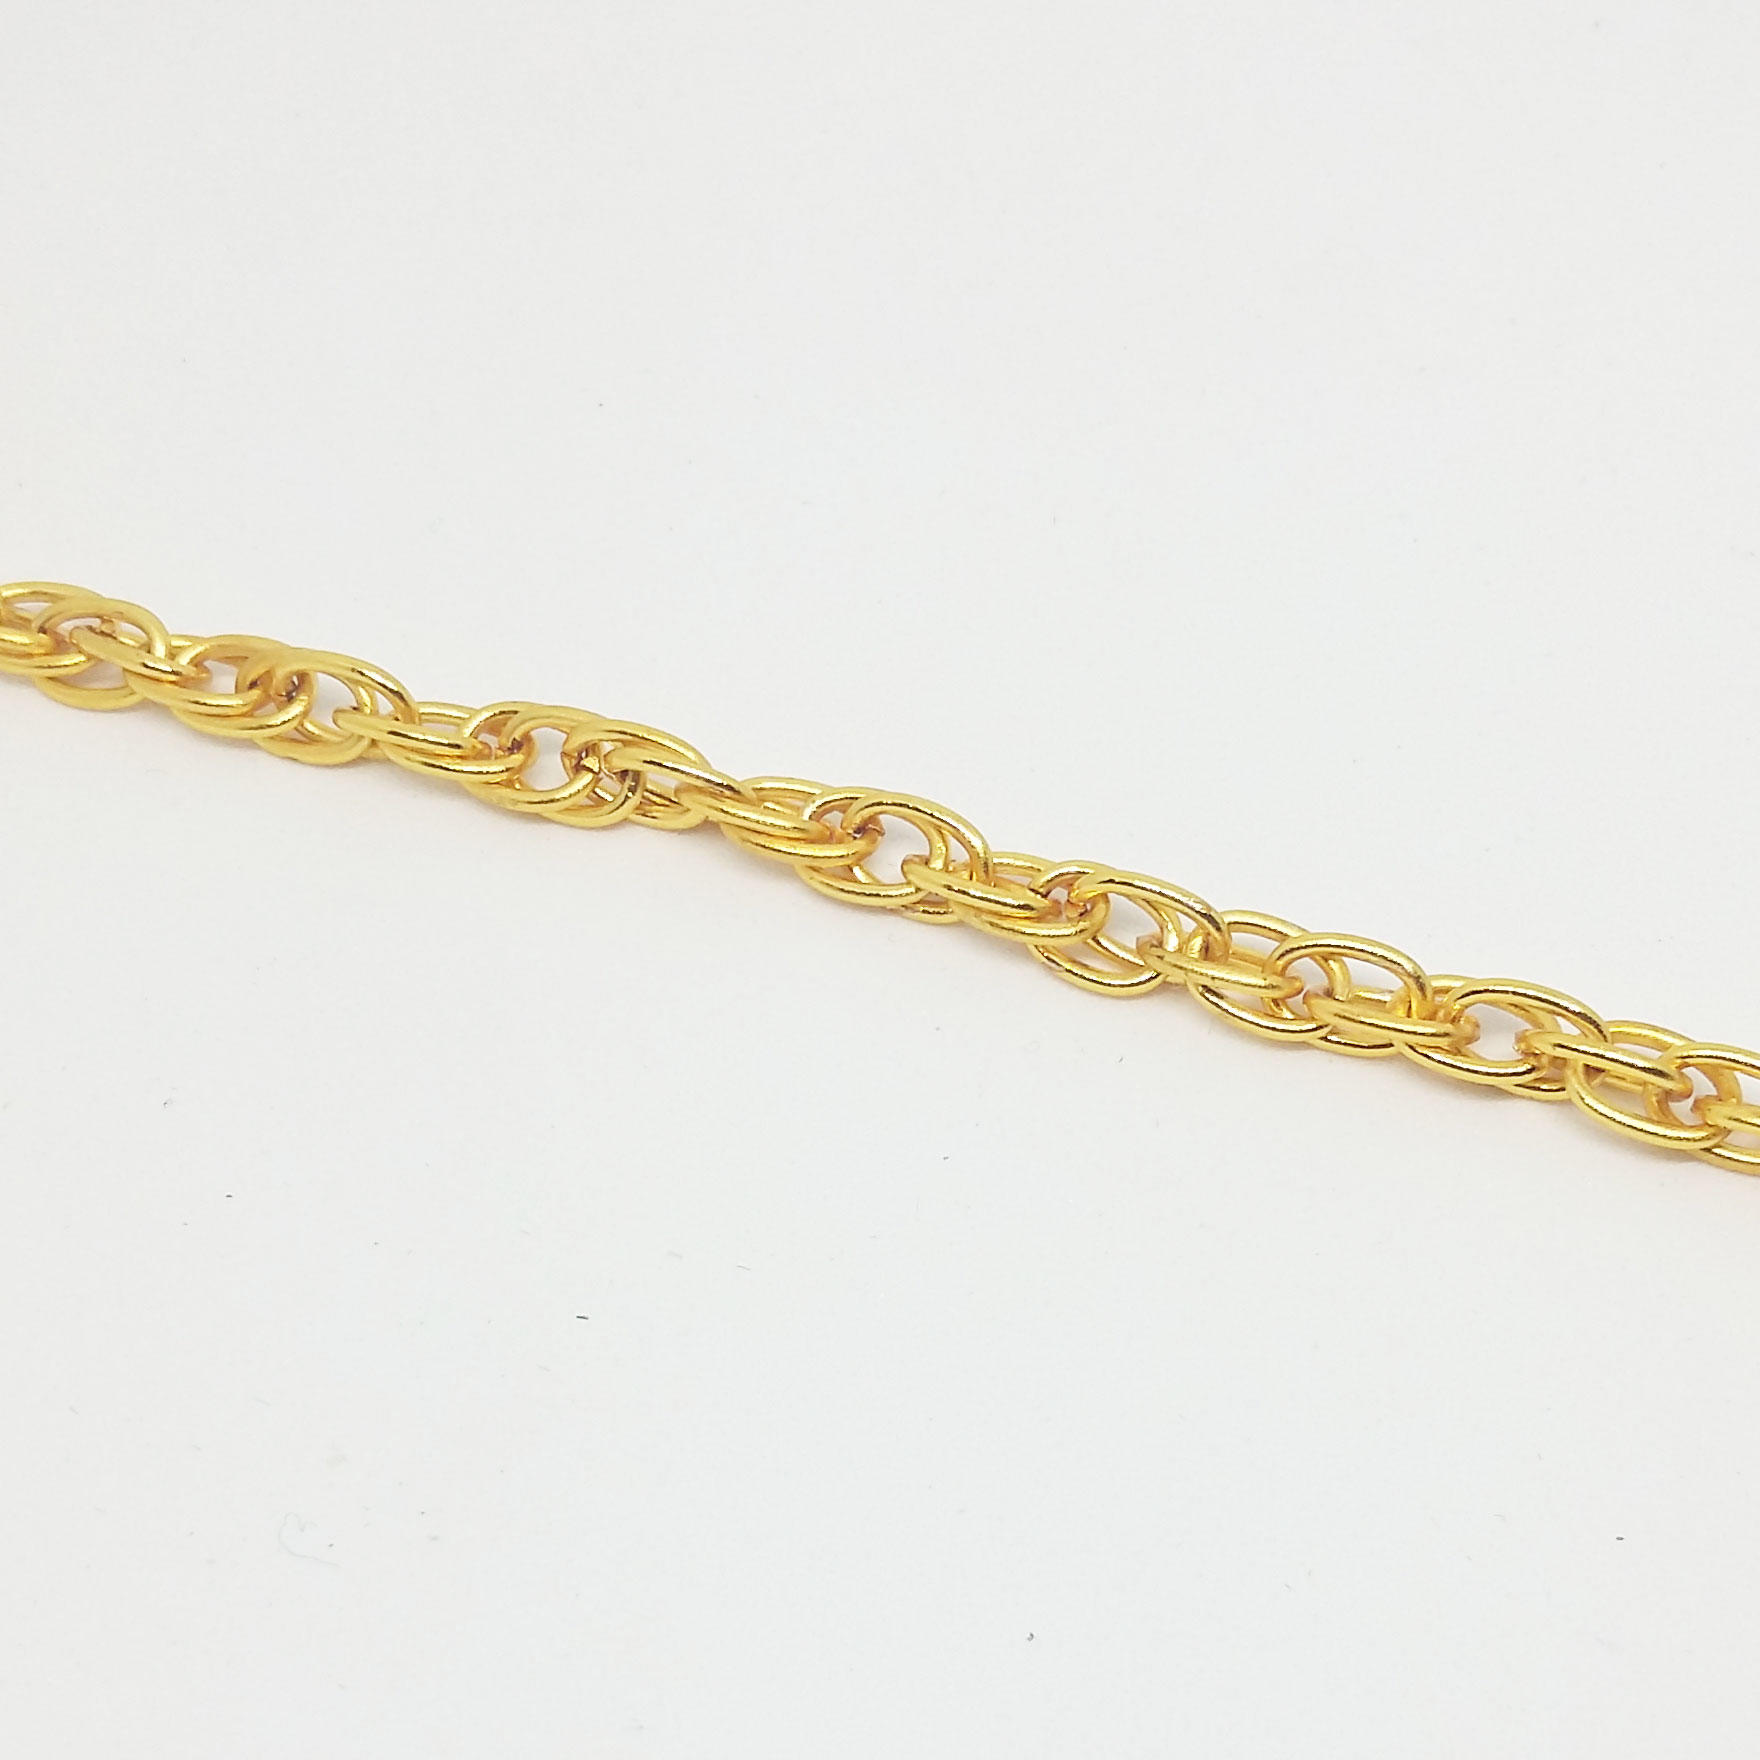 6x4mm Fancy Rope Chain - Gold Plated